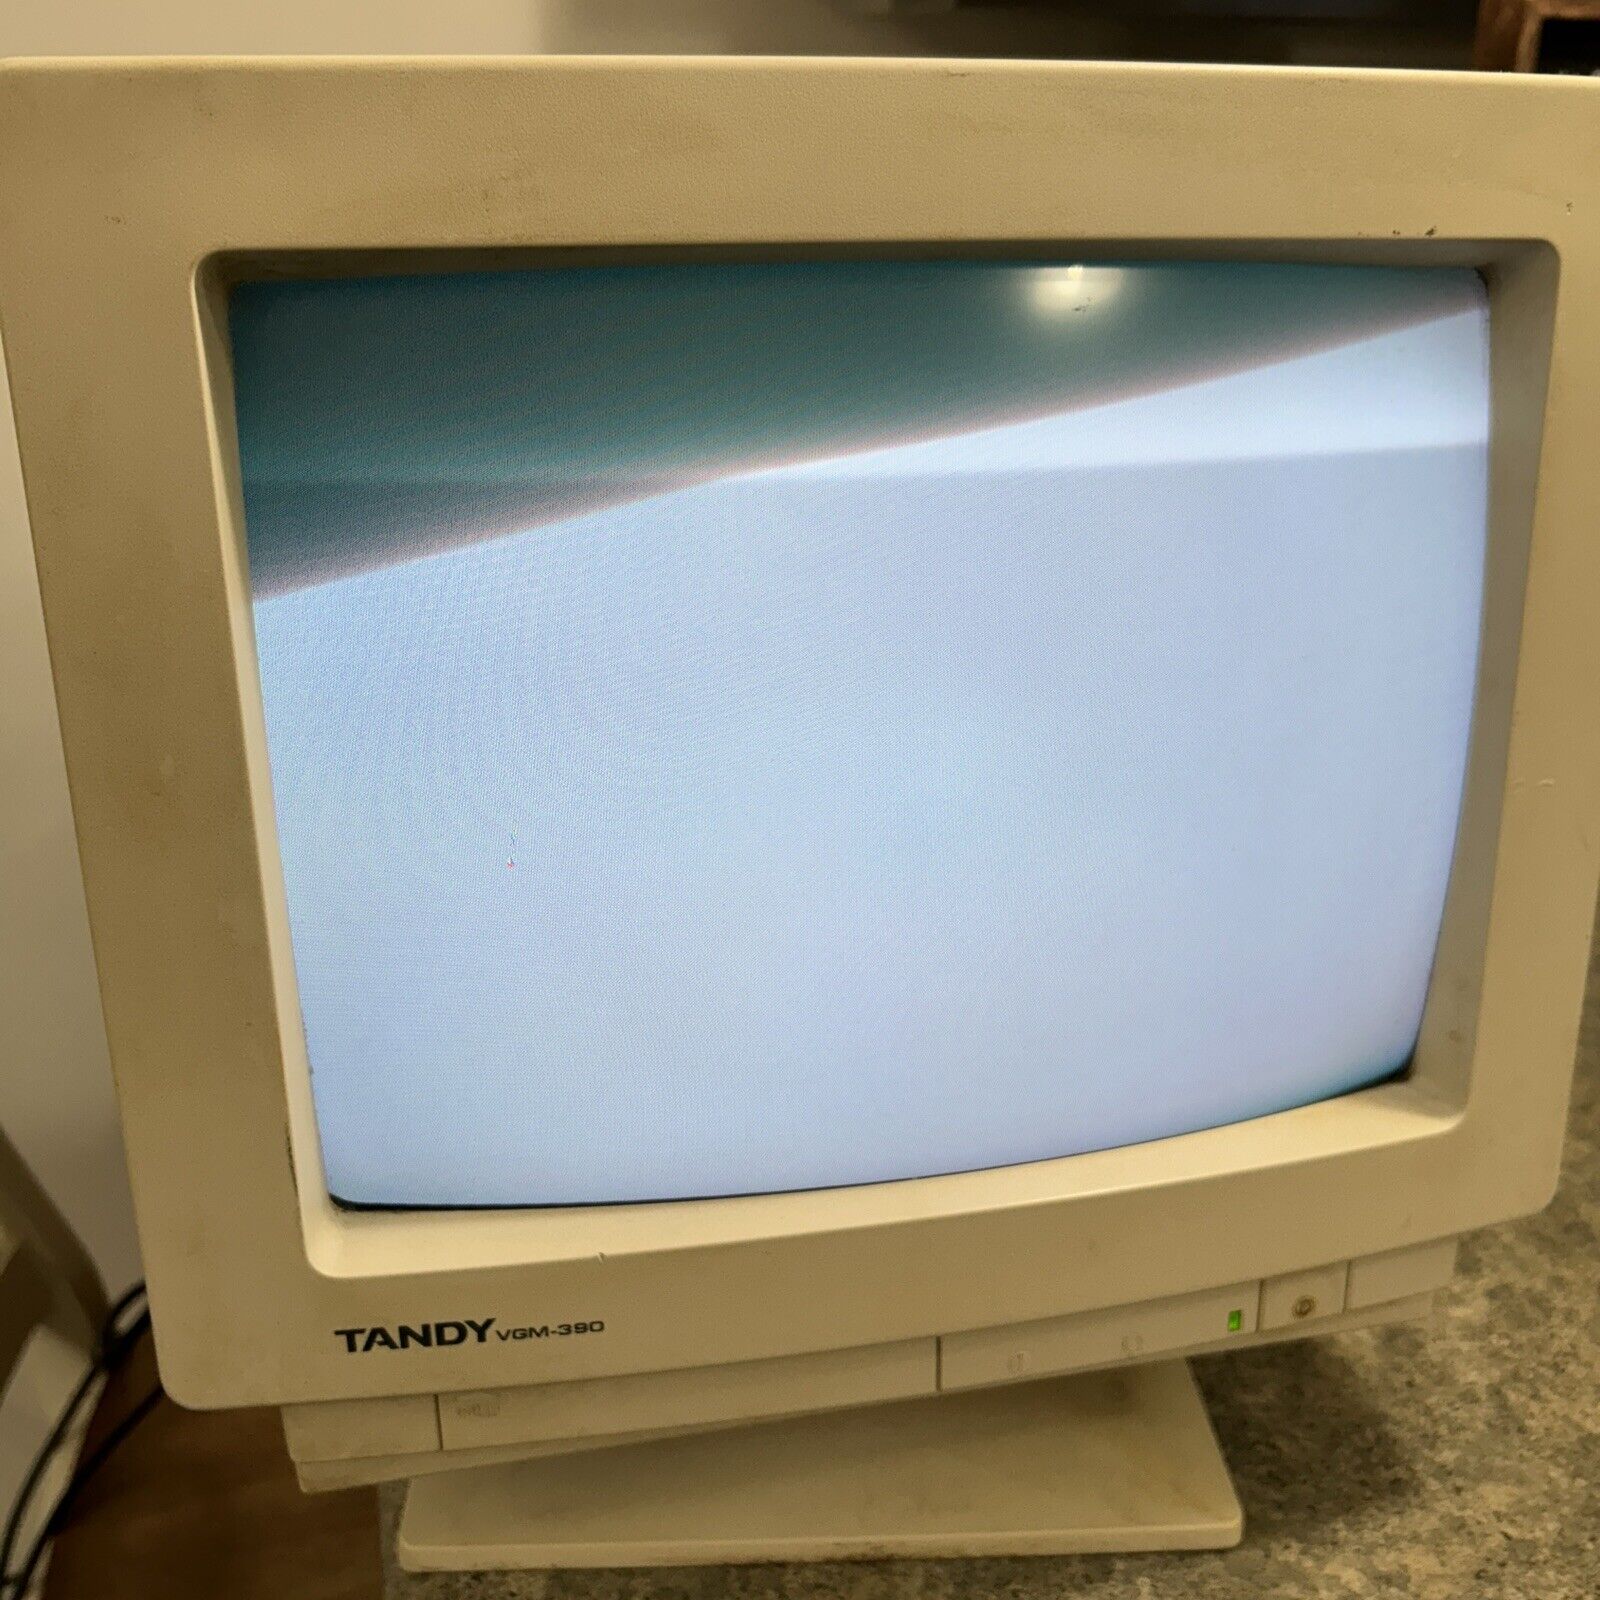 Rare Vintage Tandy VGM -390 13” Retro Computer Color Monitor UNTESTED Powers